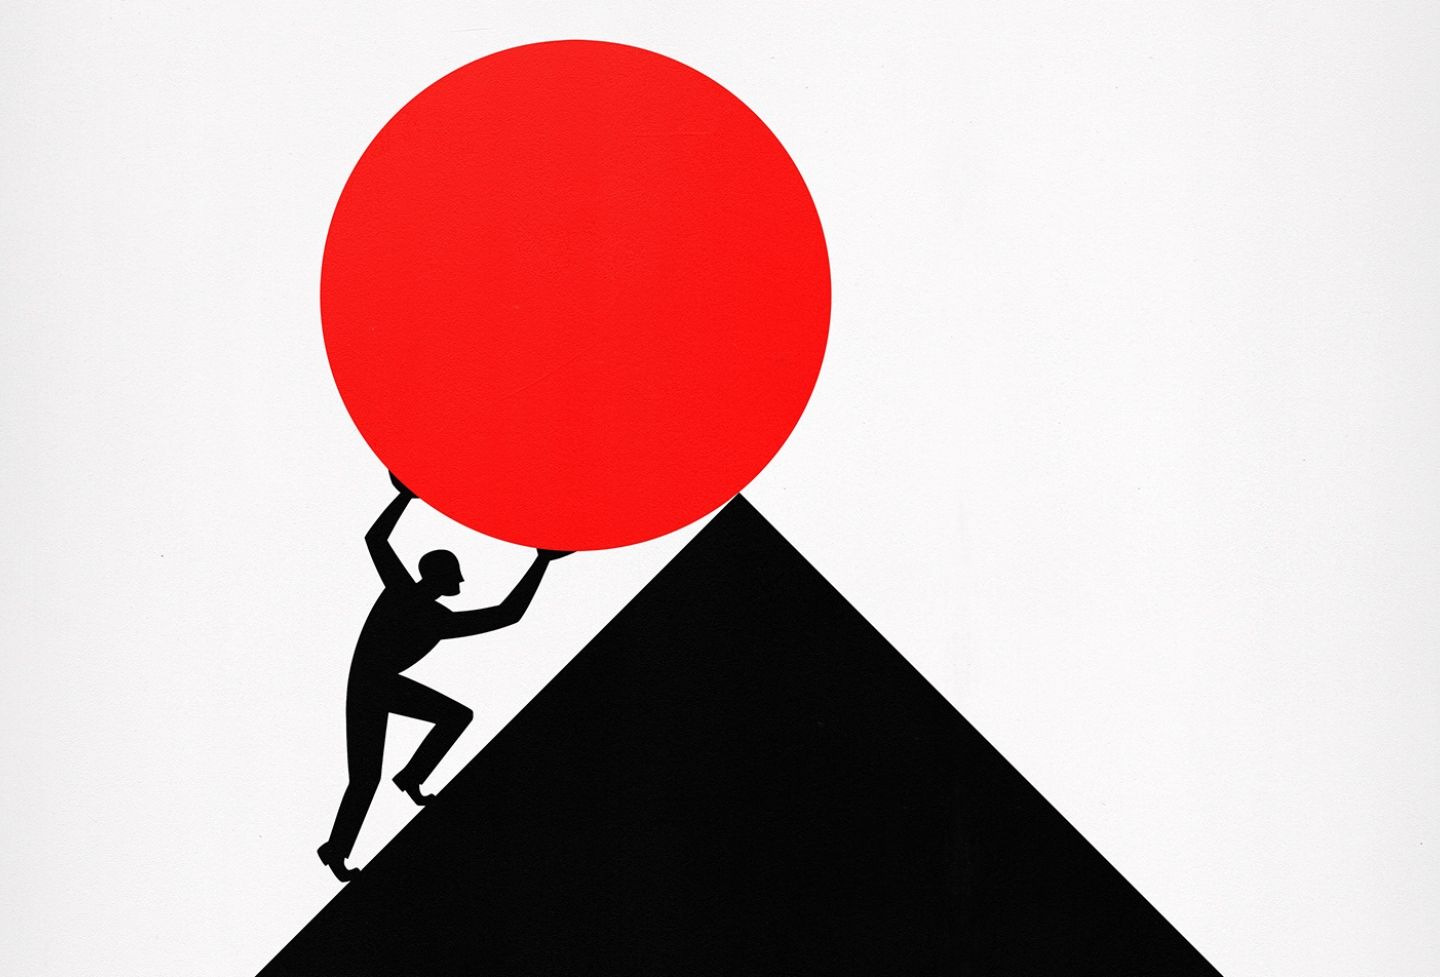 An illustration of a person pushing a circular object up a triangular hill.